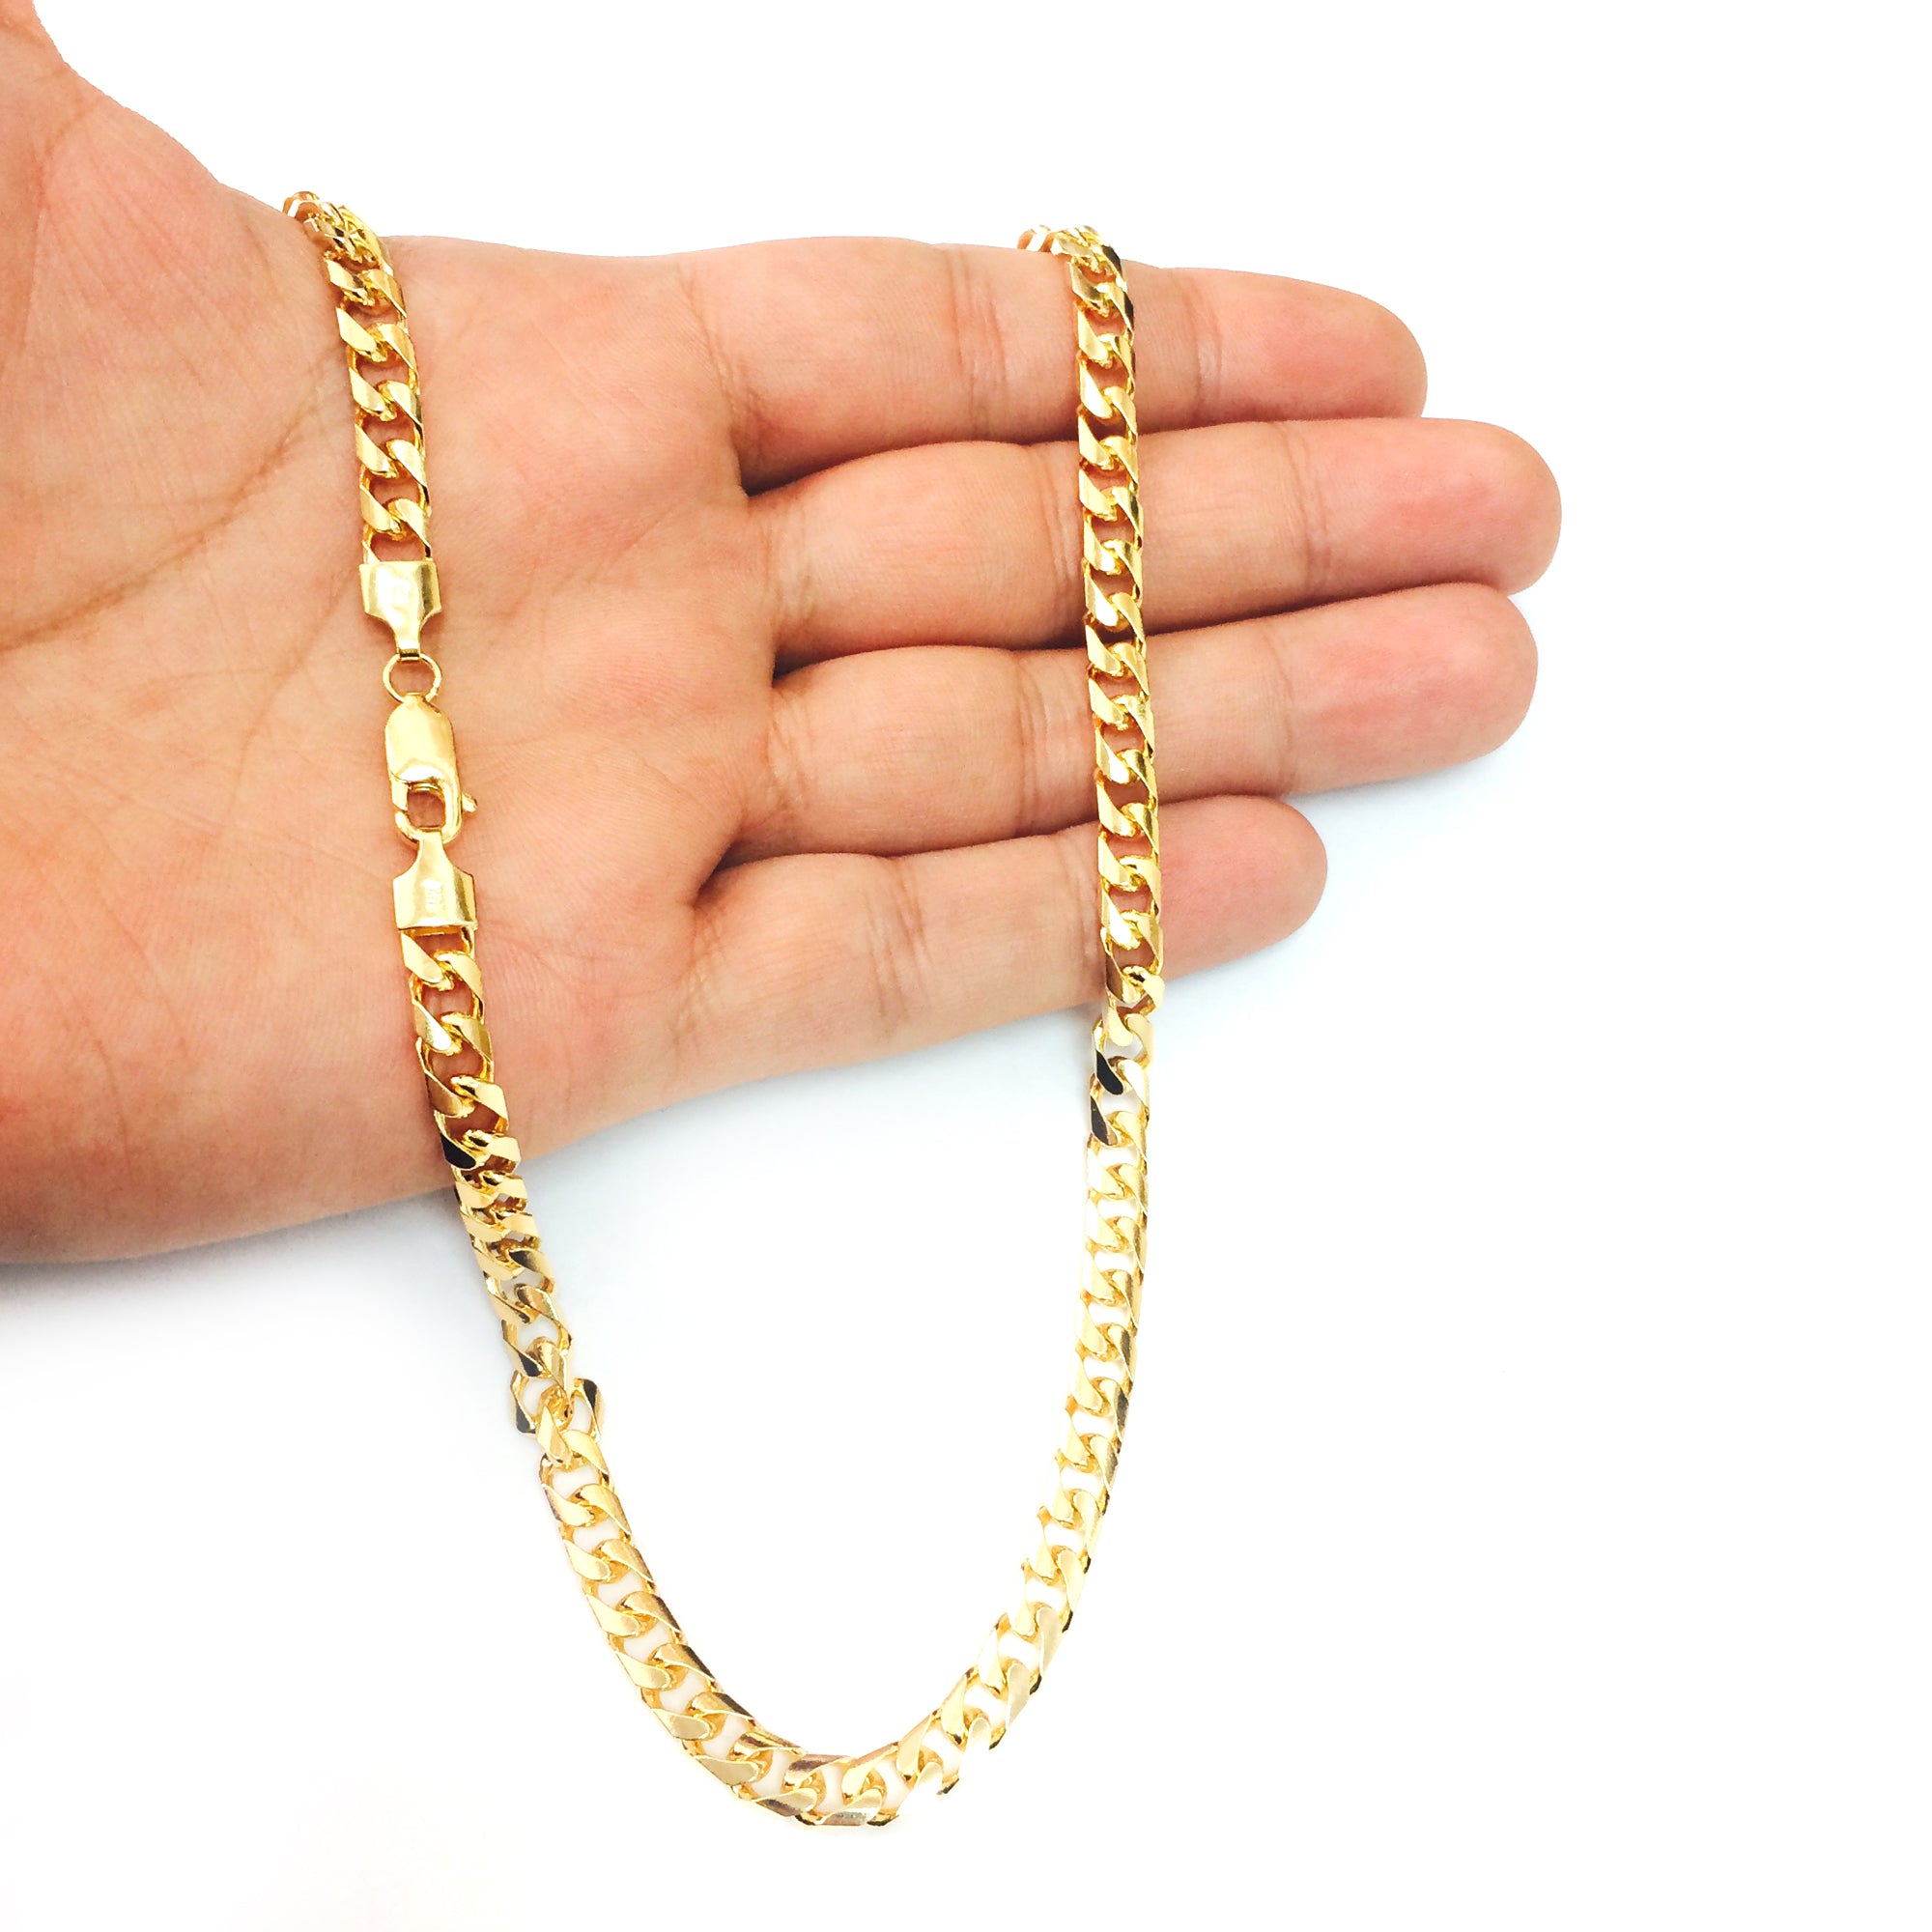 14k Yellow Solid Gold Miami Cuban Link Chain Mens Bracelet, 5.7mm, 8.5" fine designer jewelry for men and women